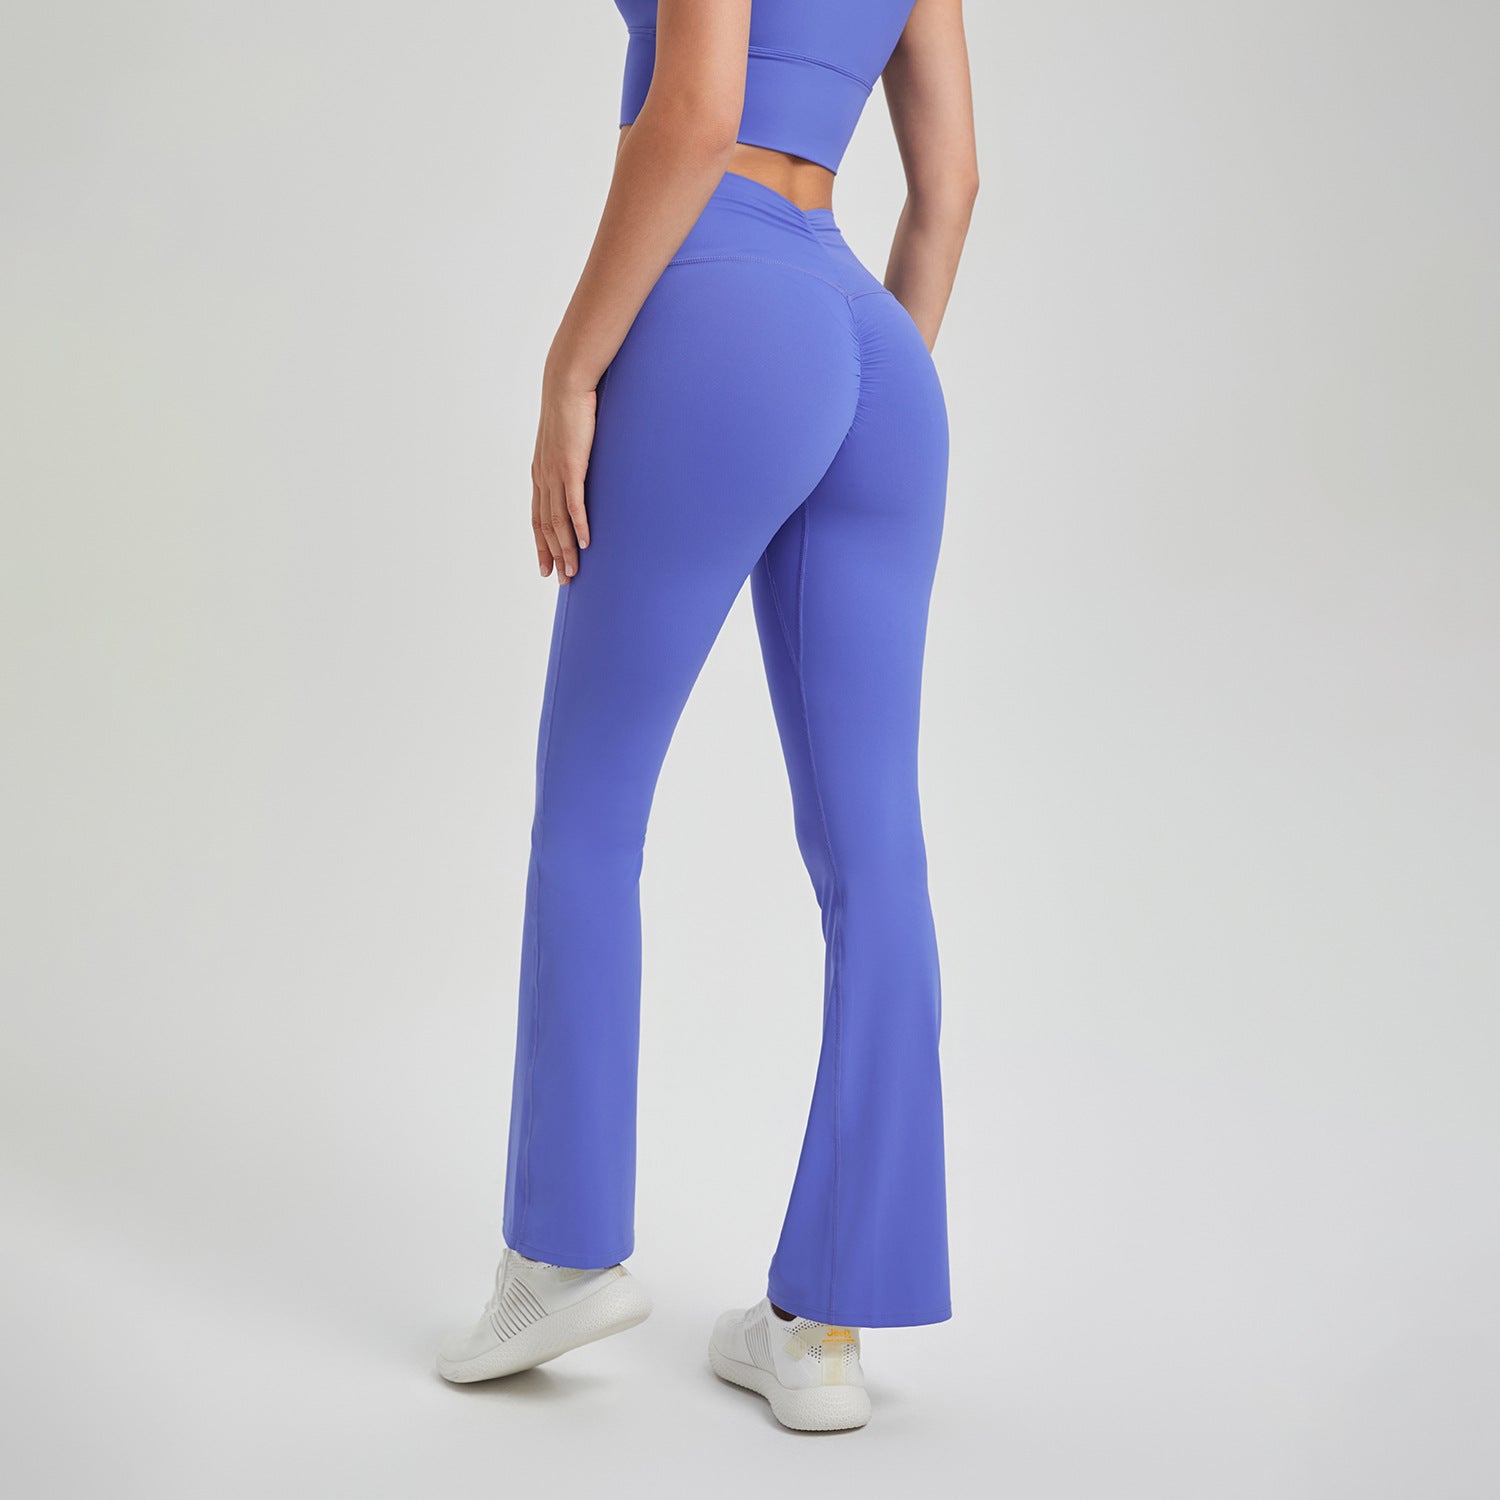 Lycra High Waist Pleated Hip Lifting Anti Curling Nude Feel Yoga Pants Outer Wear Running Workout Pants Breathable Fitness Bell Bottom Pants